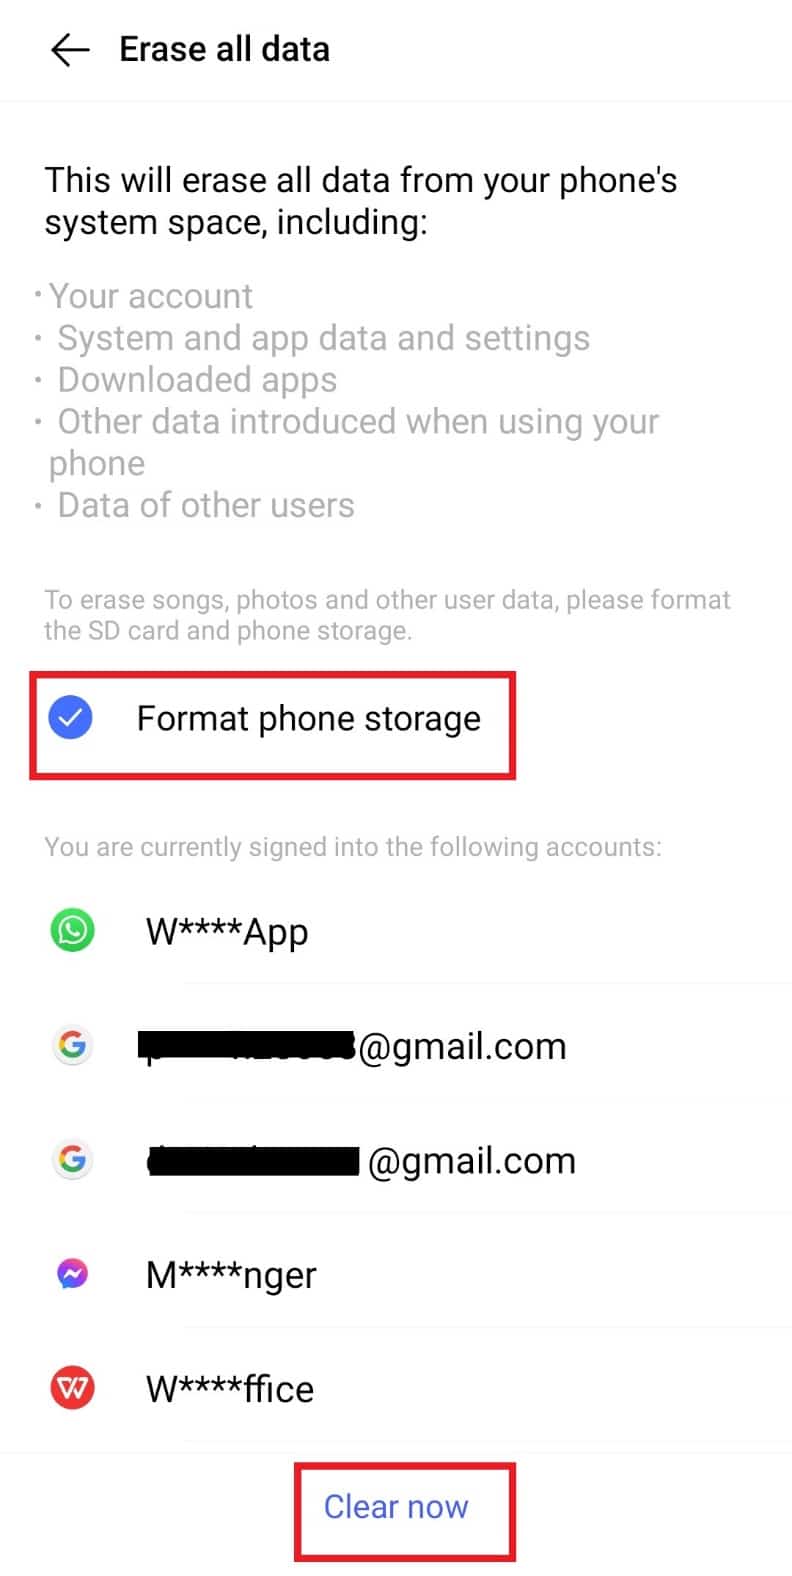 Select Format phone storage and tap on Clear now at the bottom